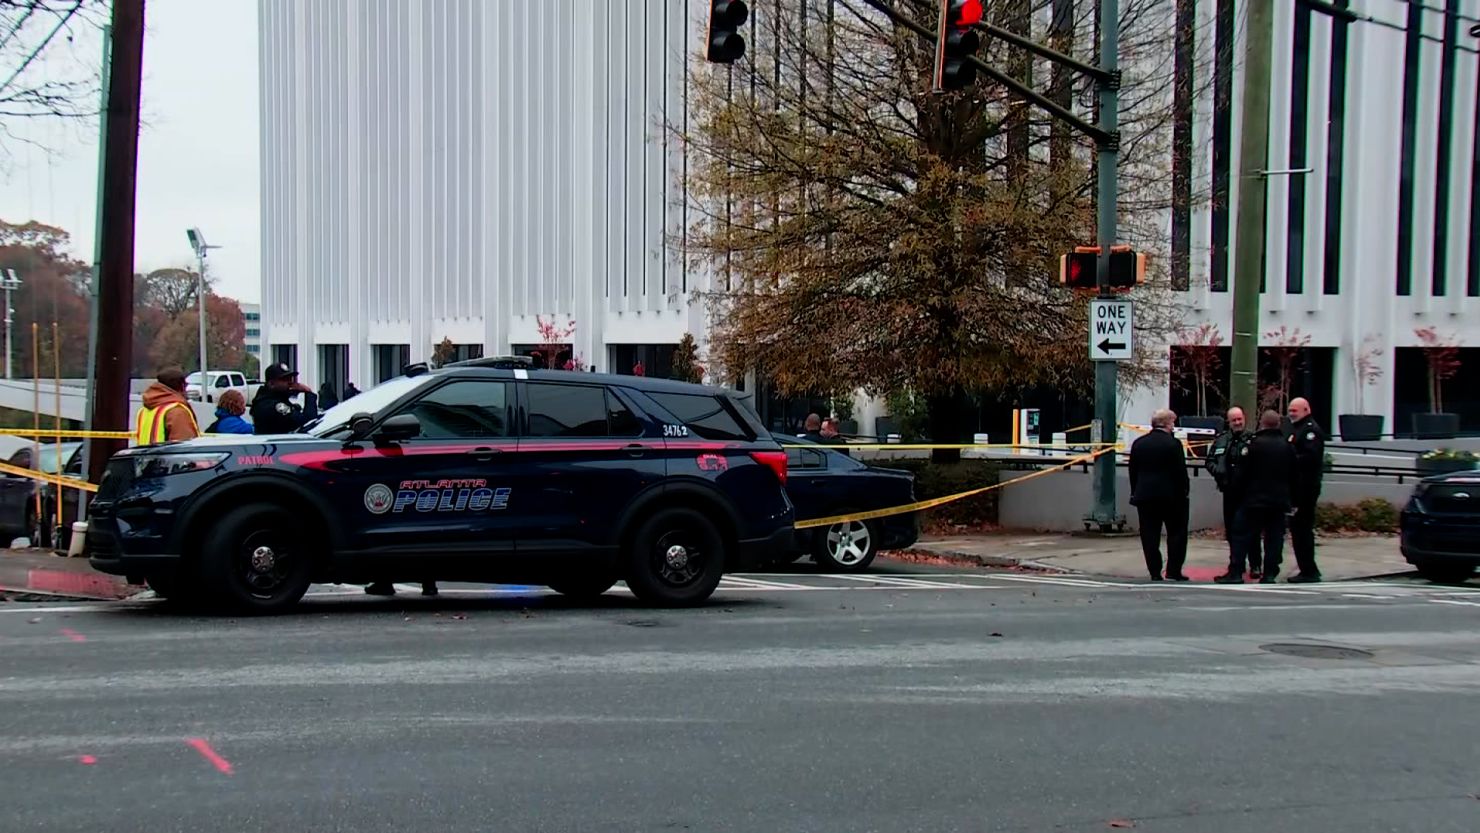 Police respond to a scene in Atlanta where there were reports of a people being injured.